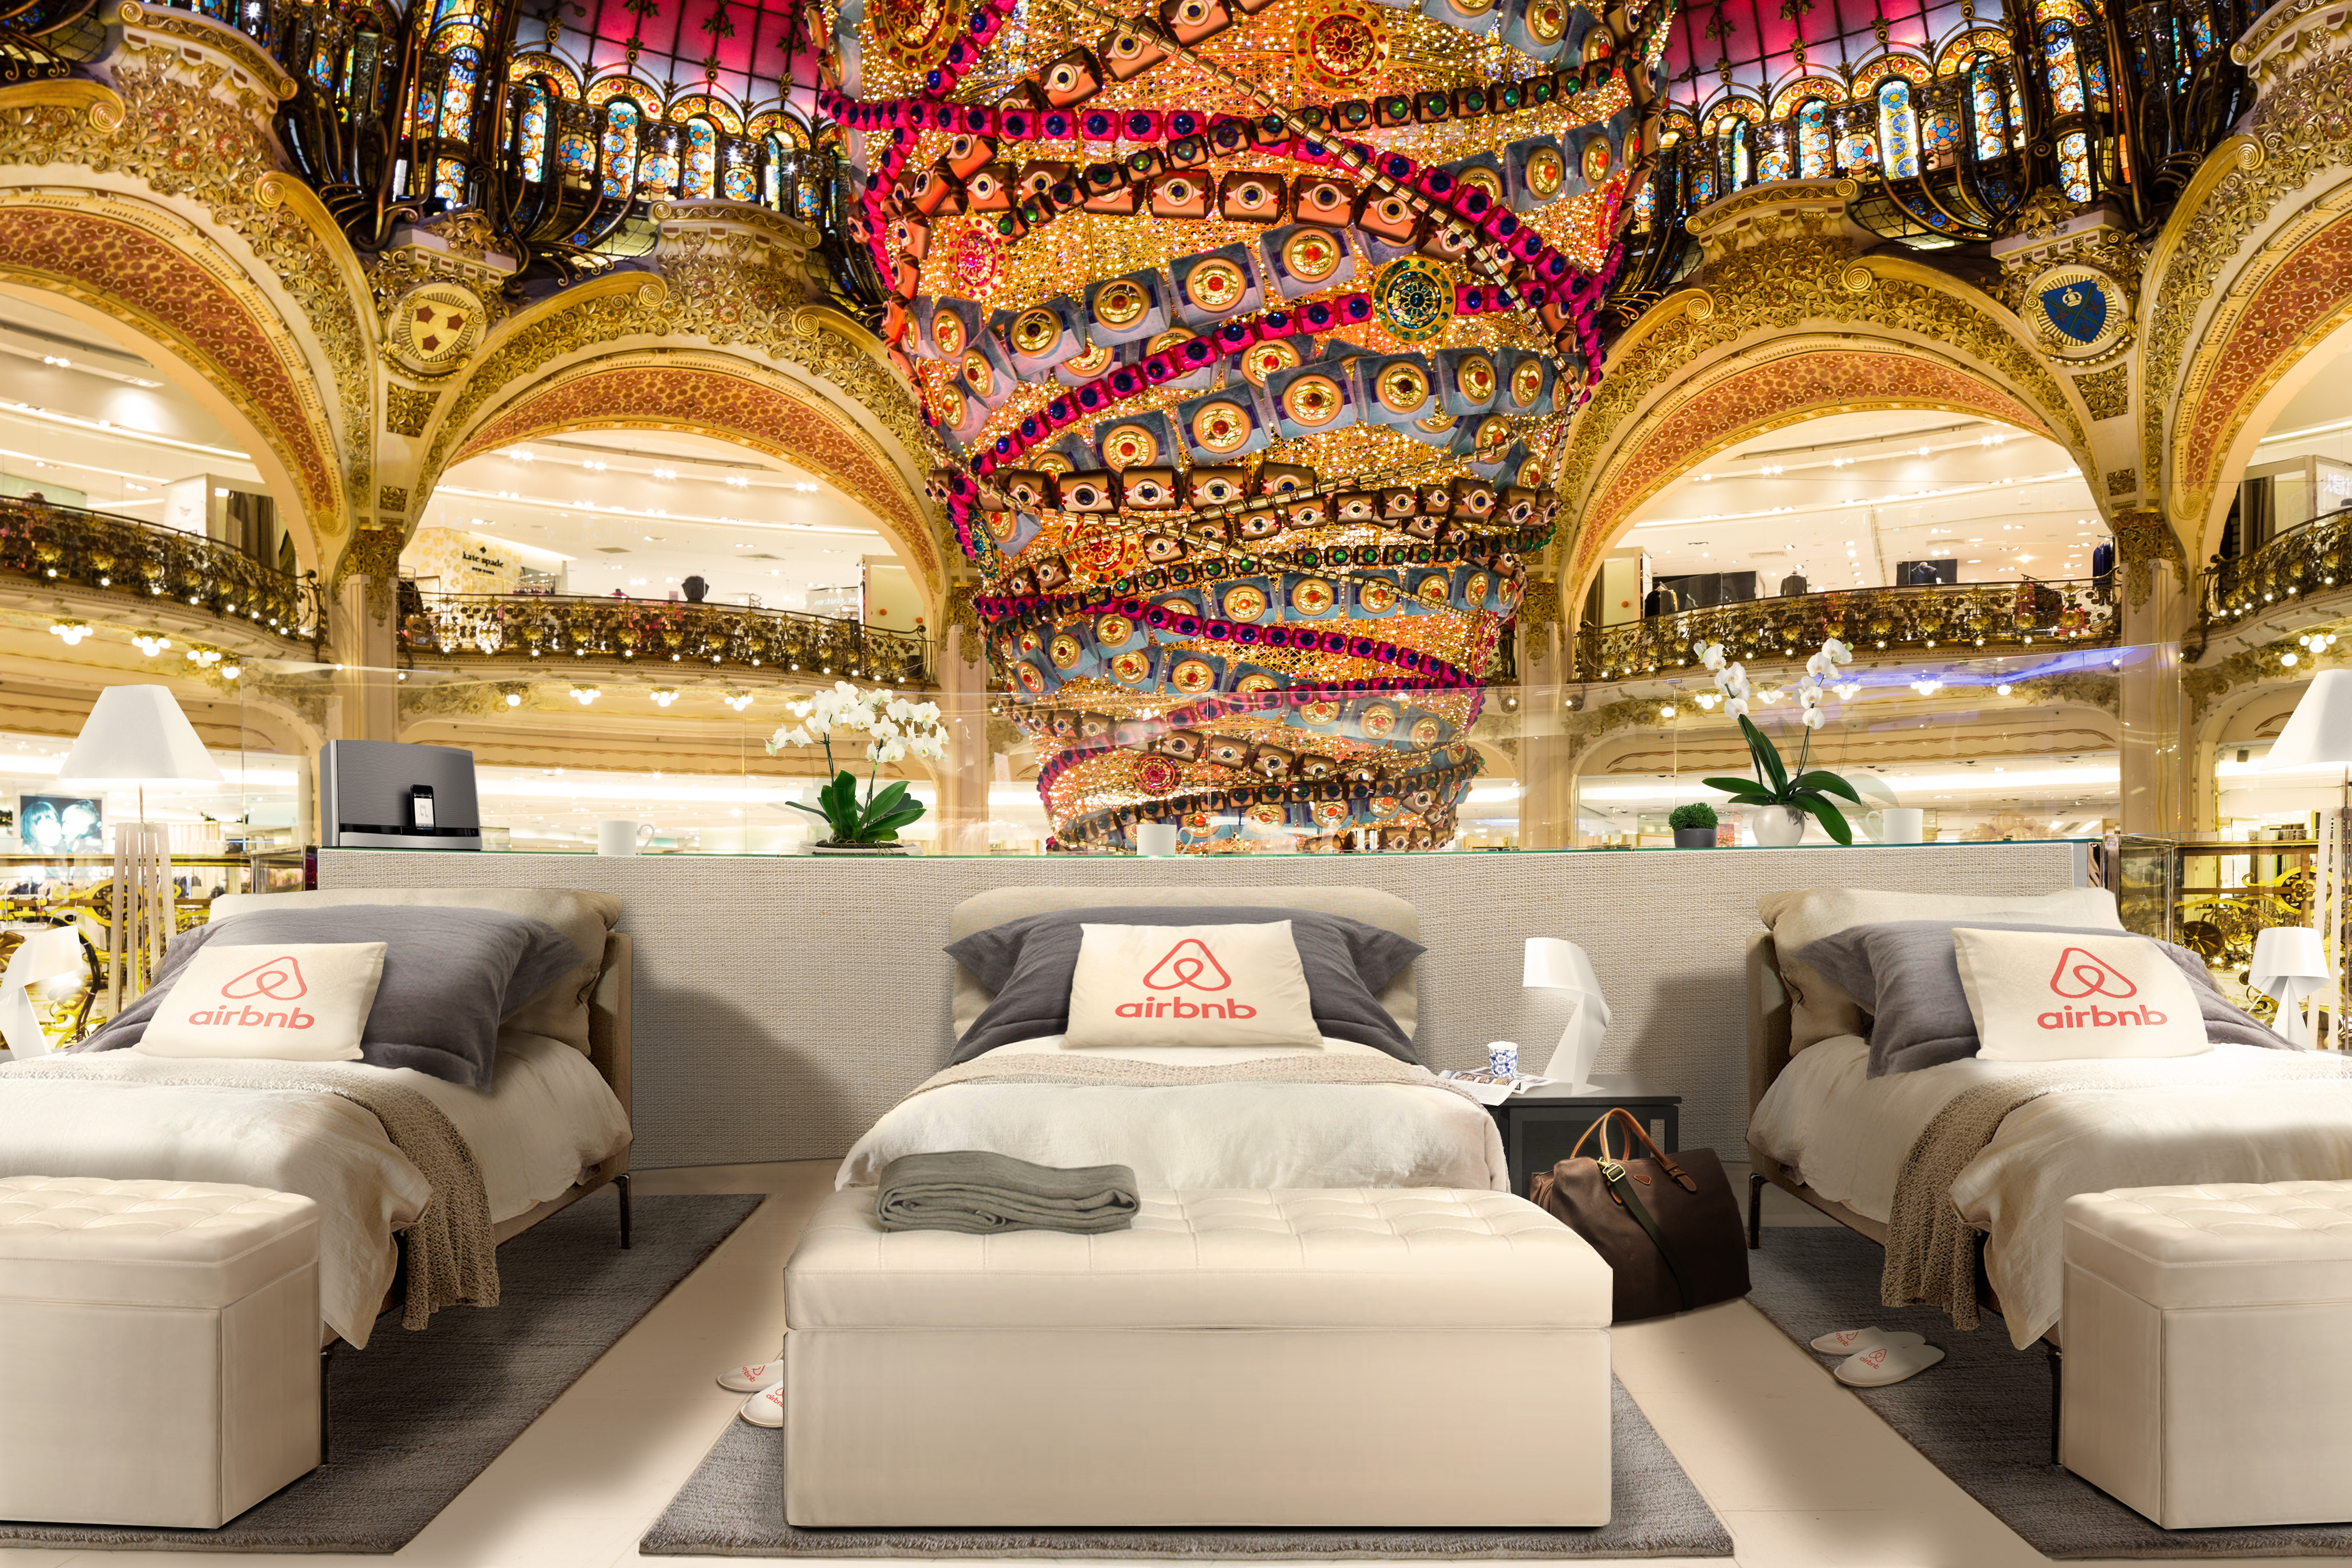 SPEND THE NIGHT AT THE GALERIES LAFAYETTE